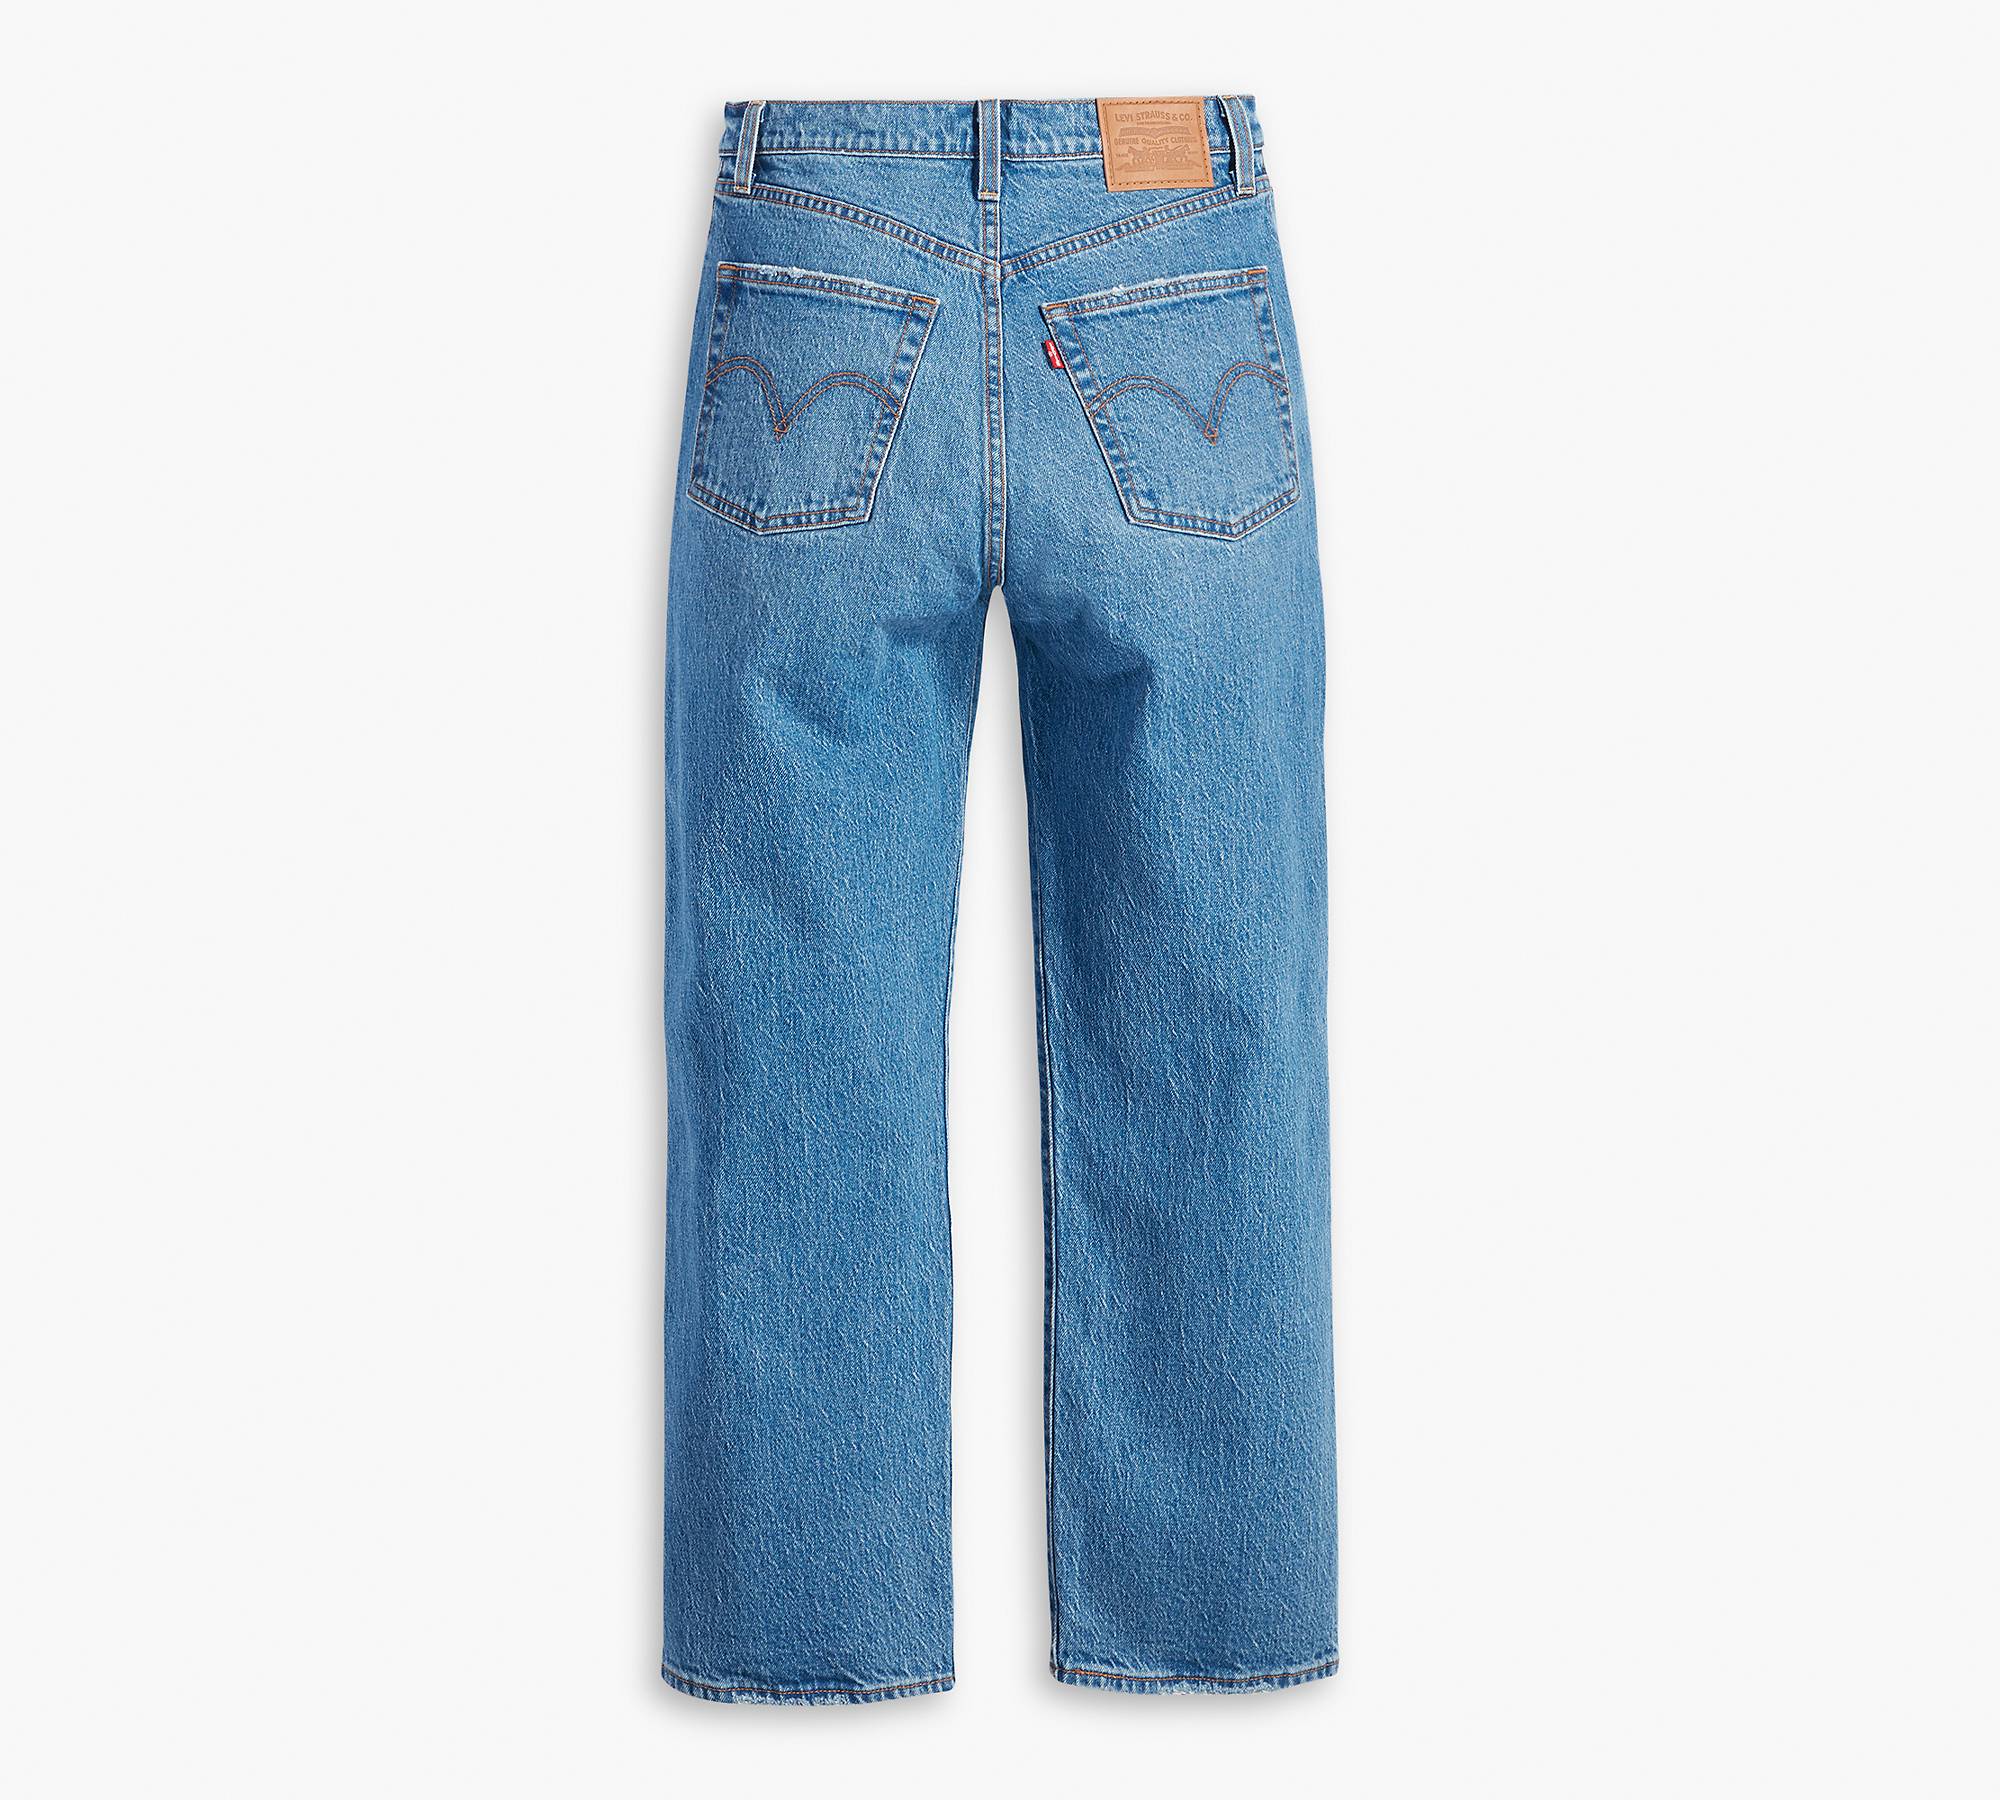 ribcage-straight-ankle-jeans-blue-levi-s-gr